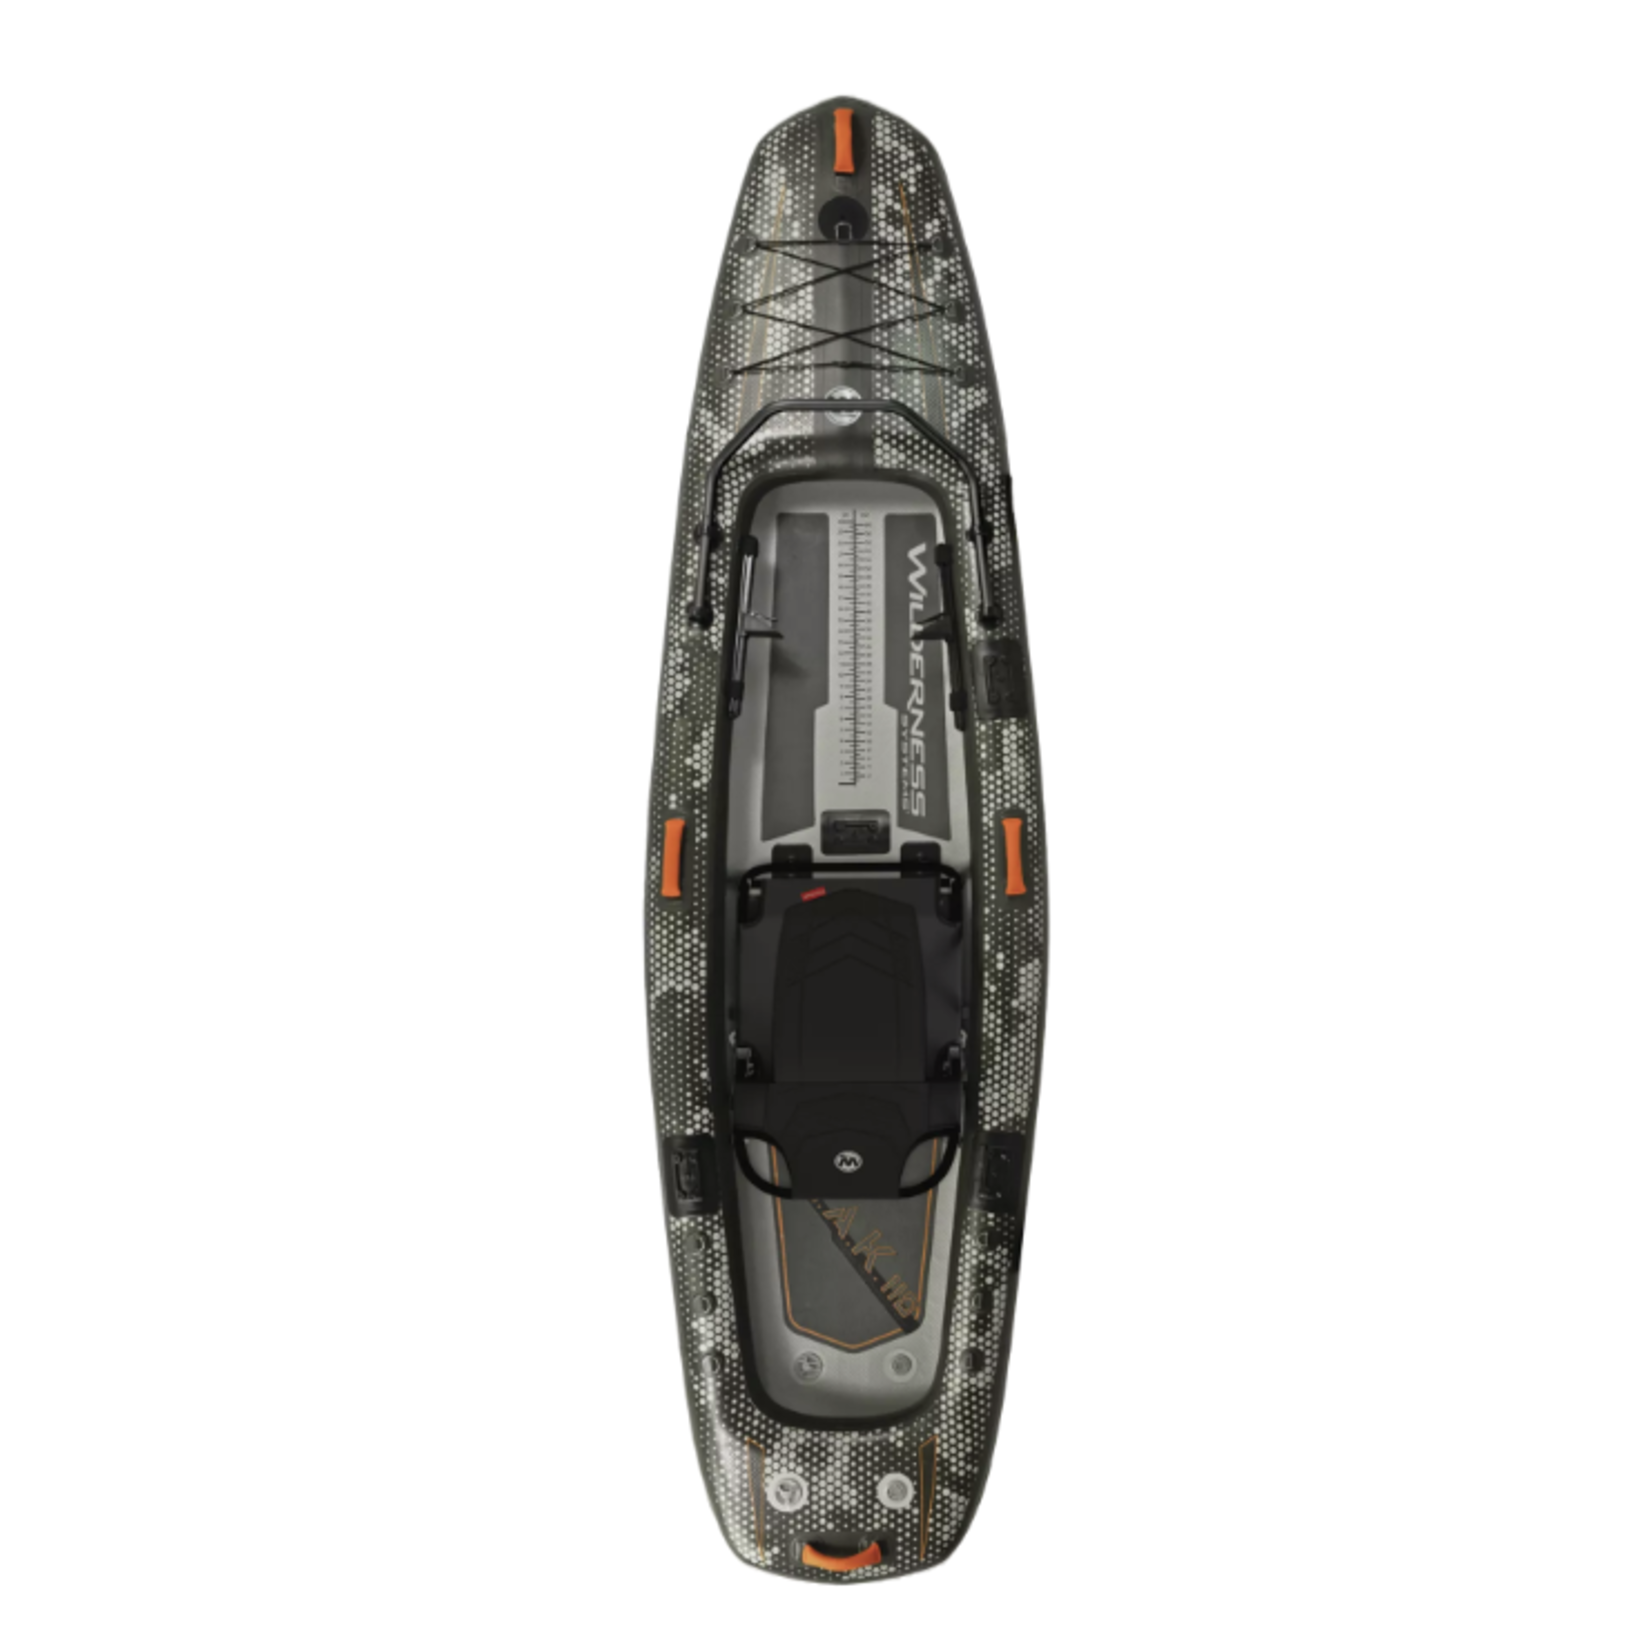 Wilderness Systems Kayak de pêche gonflable iA.T.A.K. 110